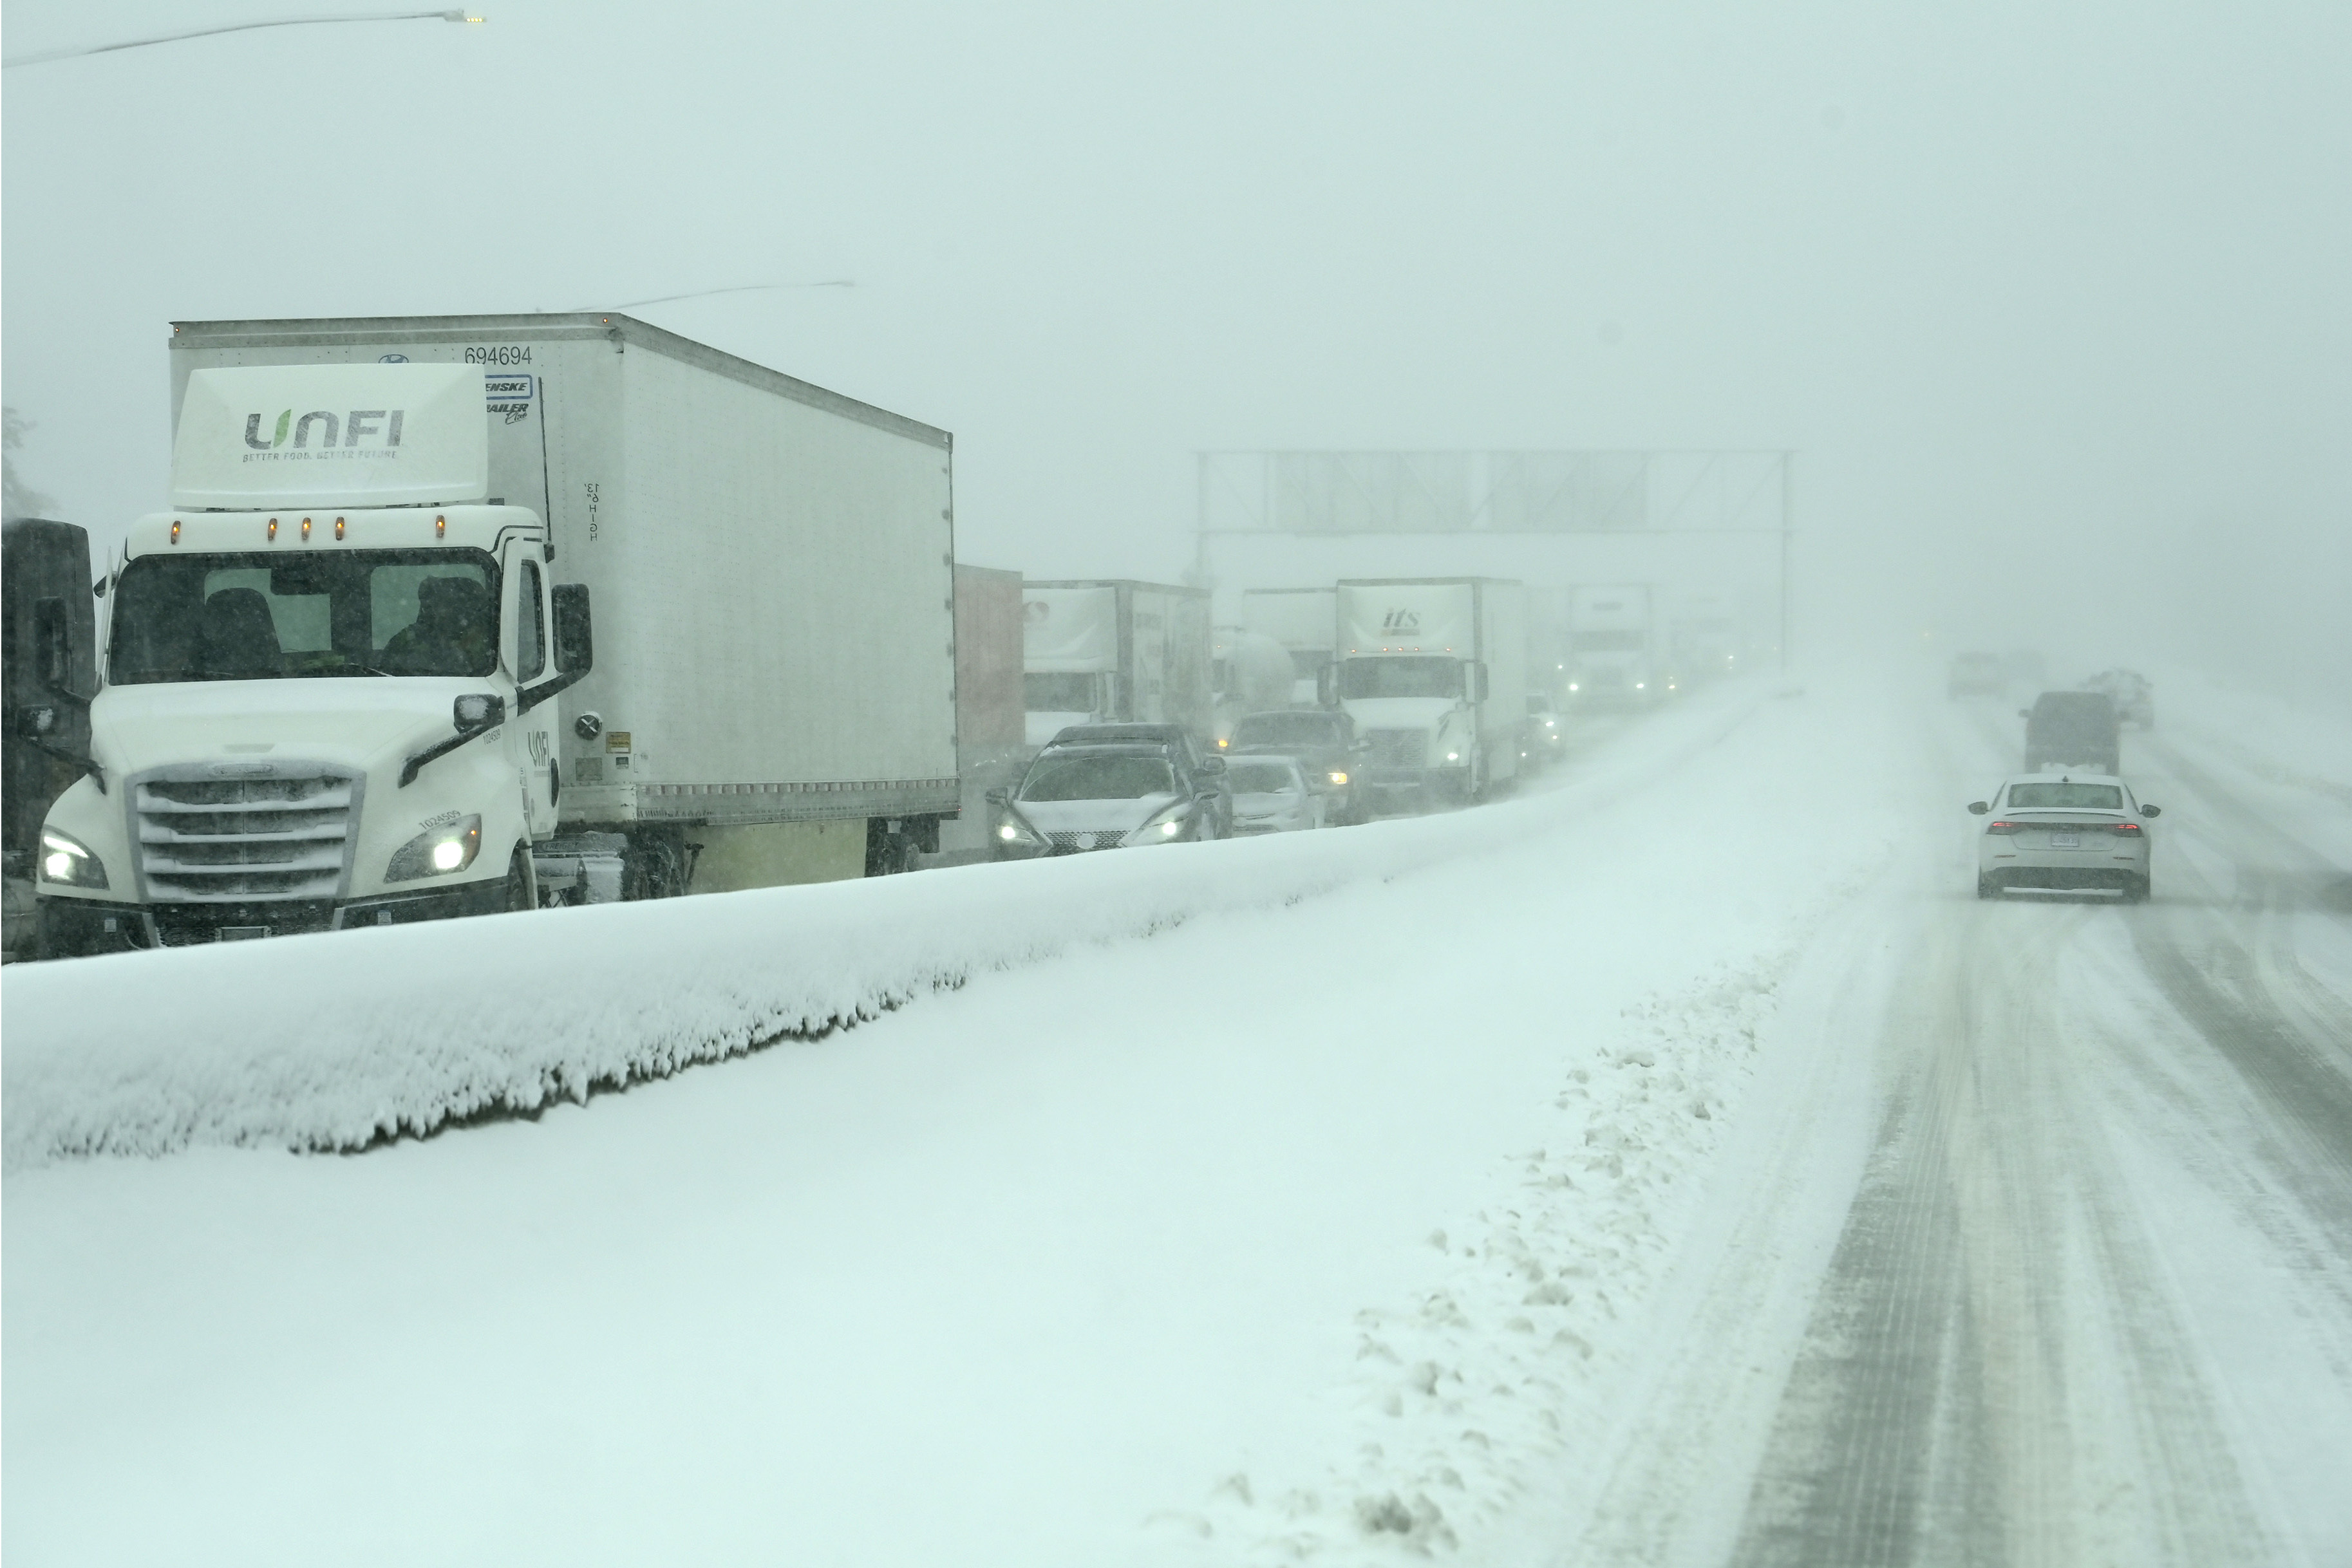 Semi-trucks and cars sit parked on a snowy freeway